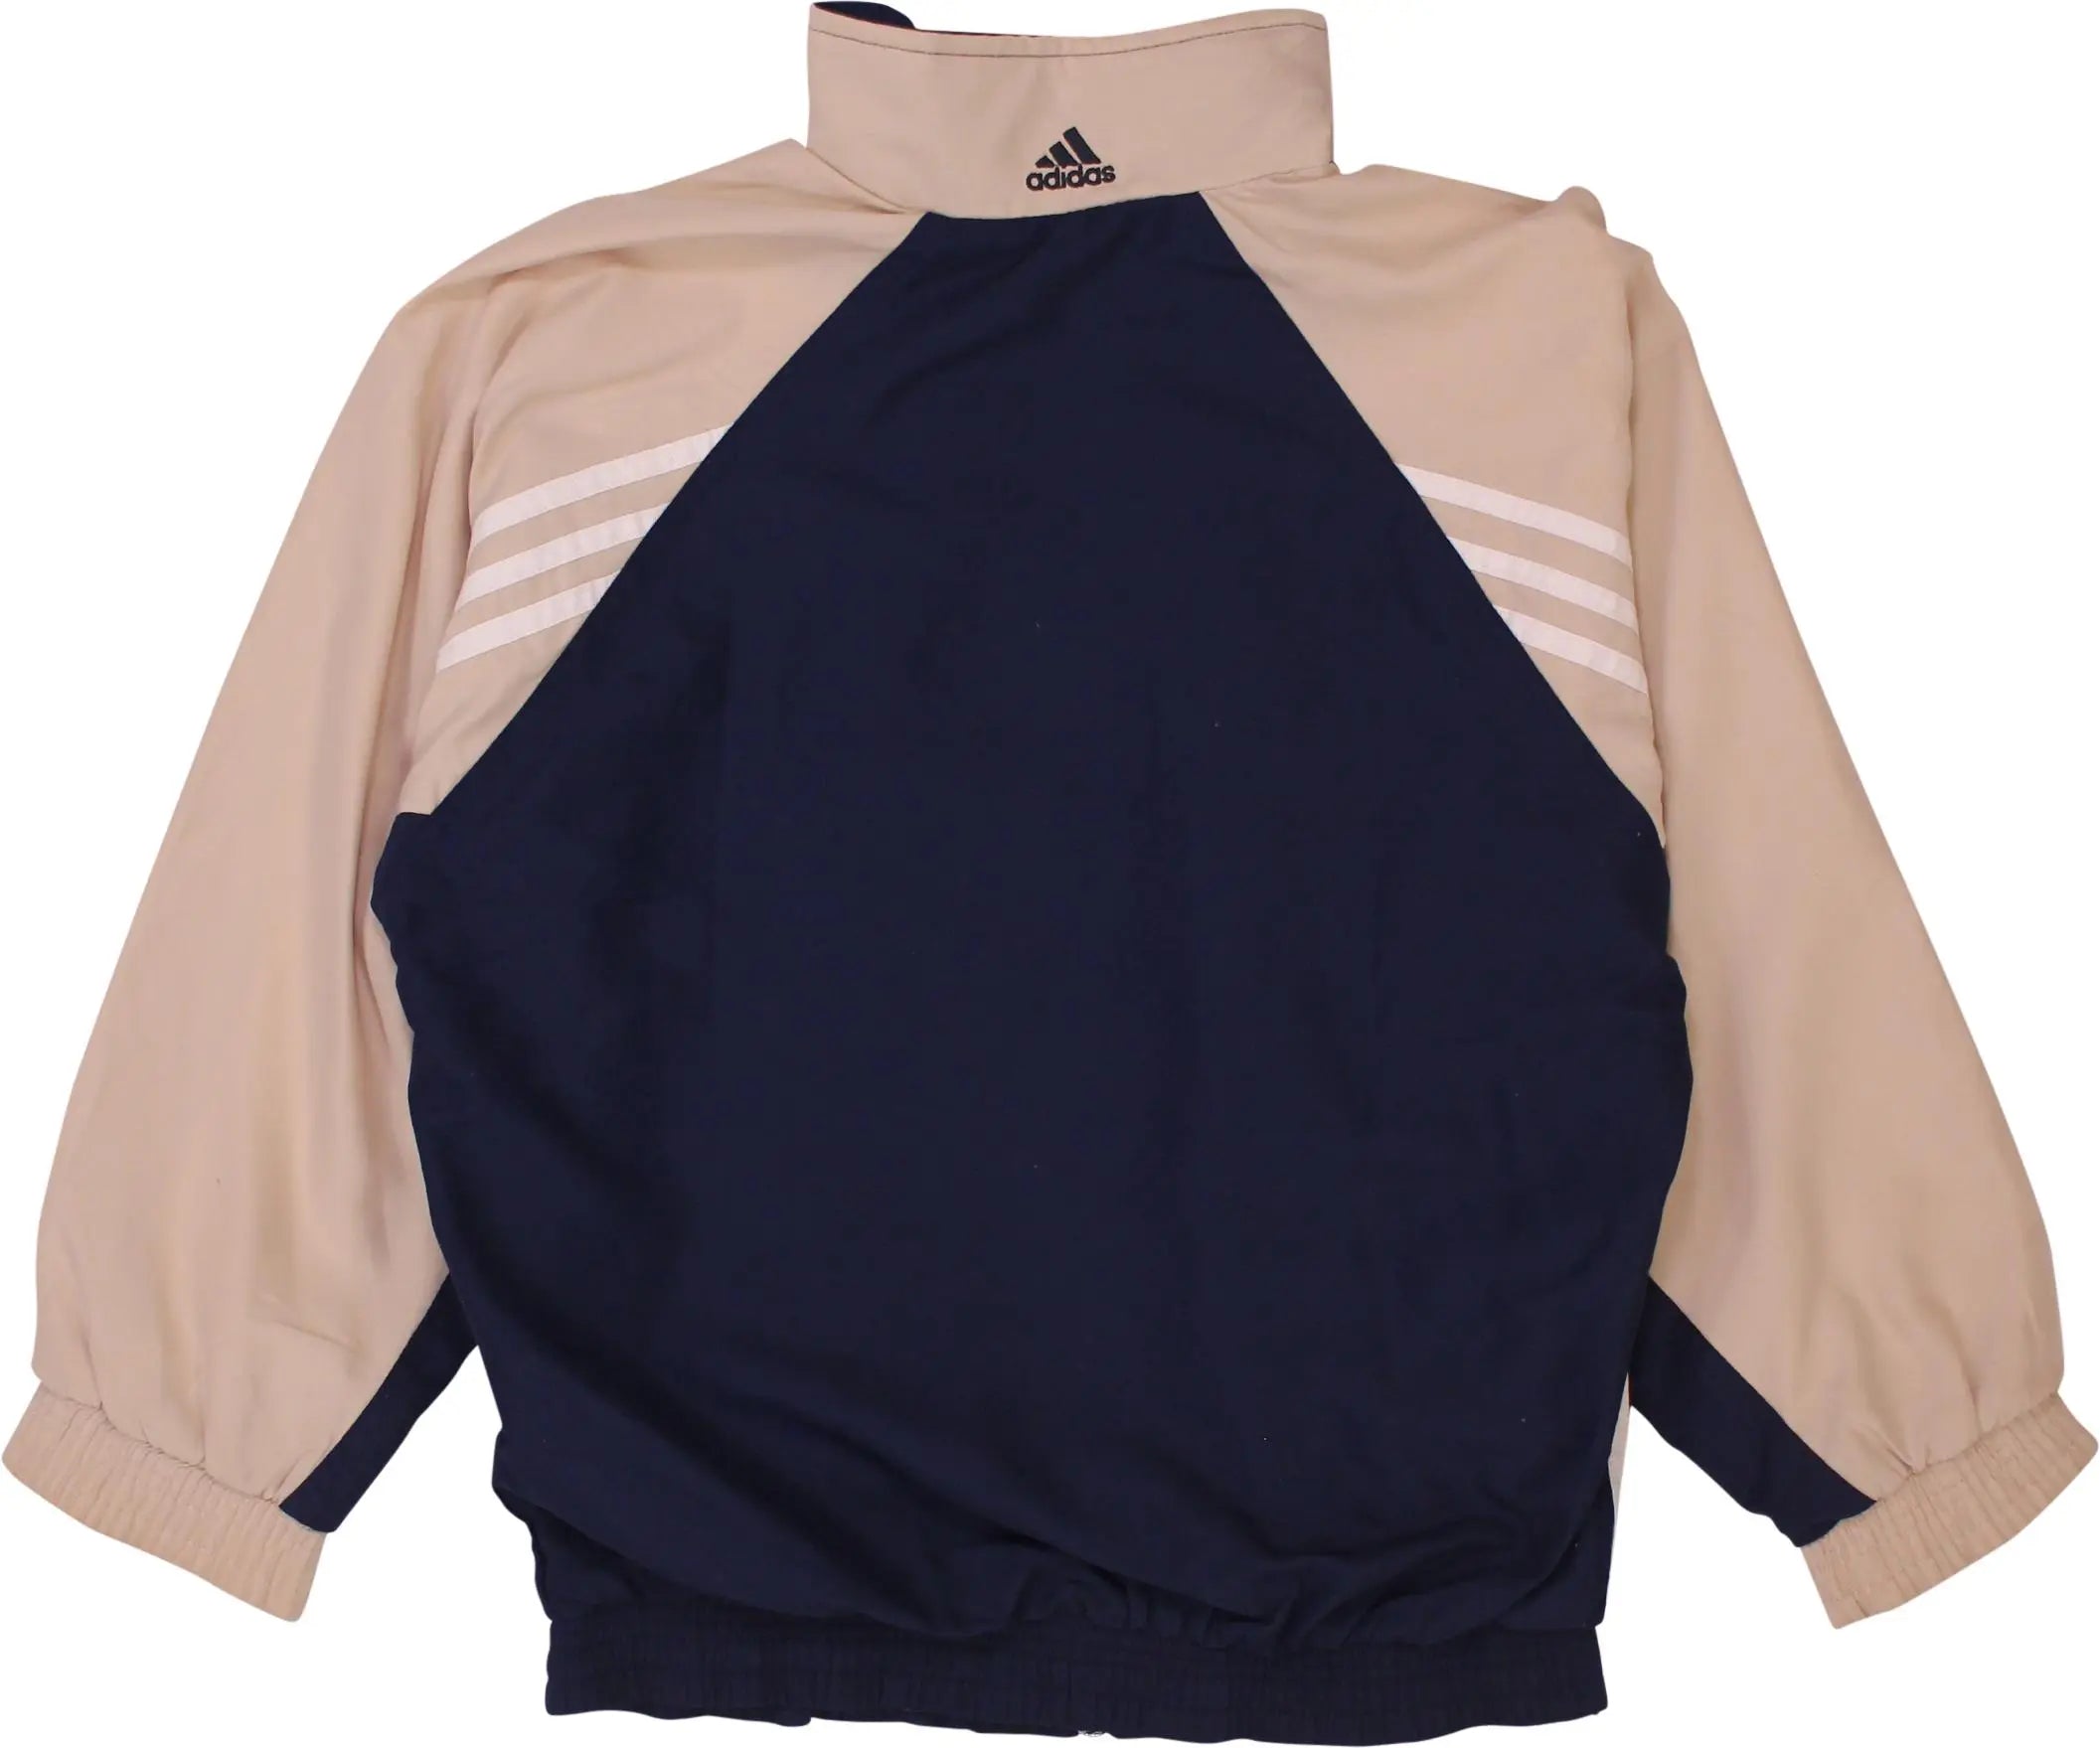 Adidas - Windbreaker by Adidias- ThriftTale.com - Vintage and second handclothing